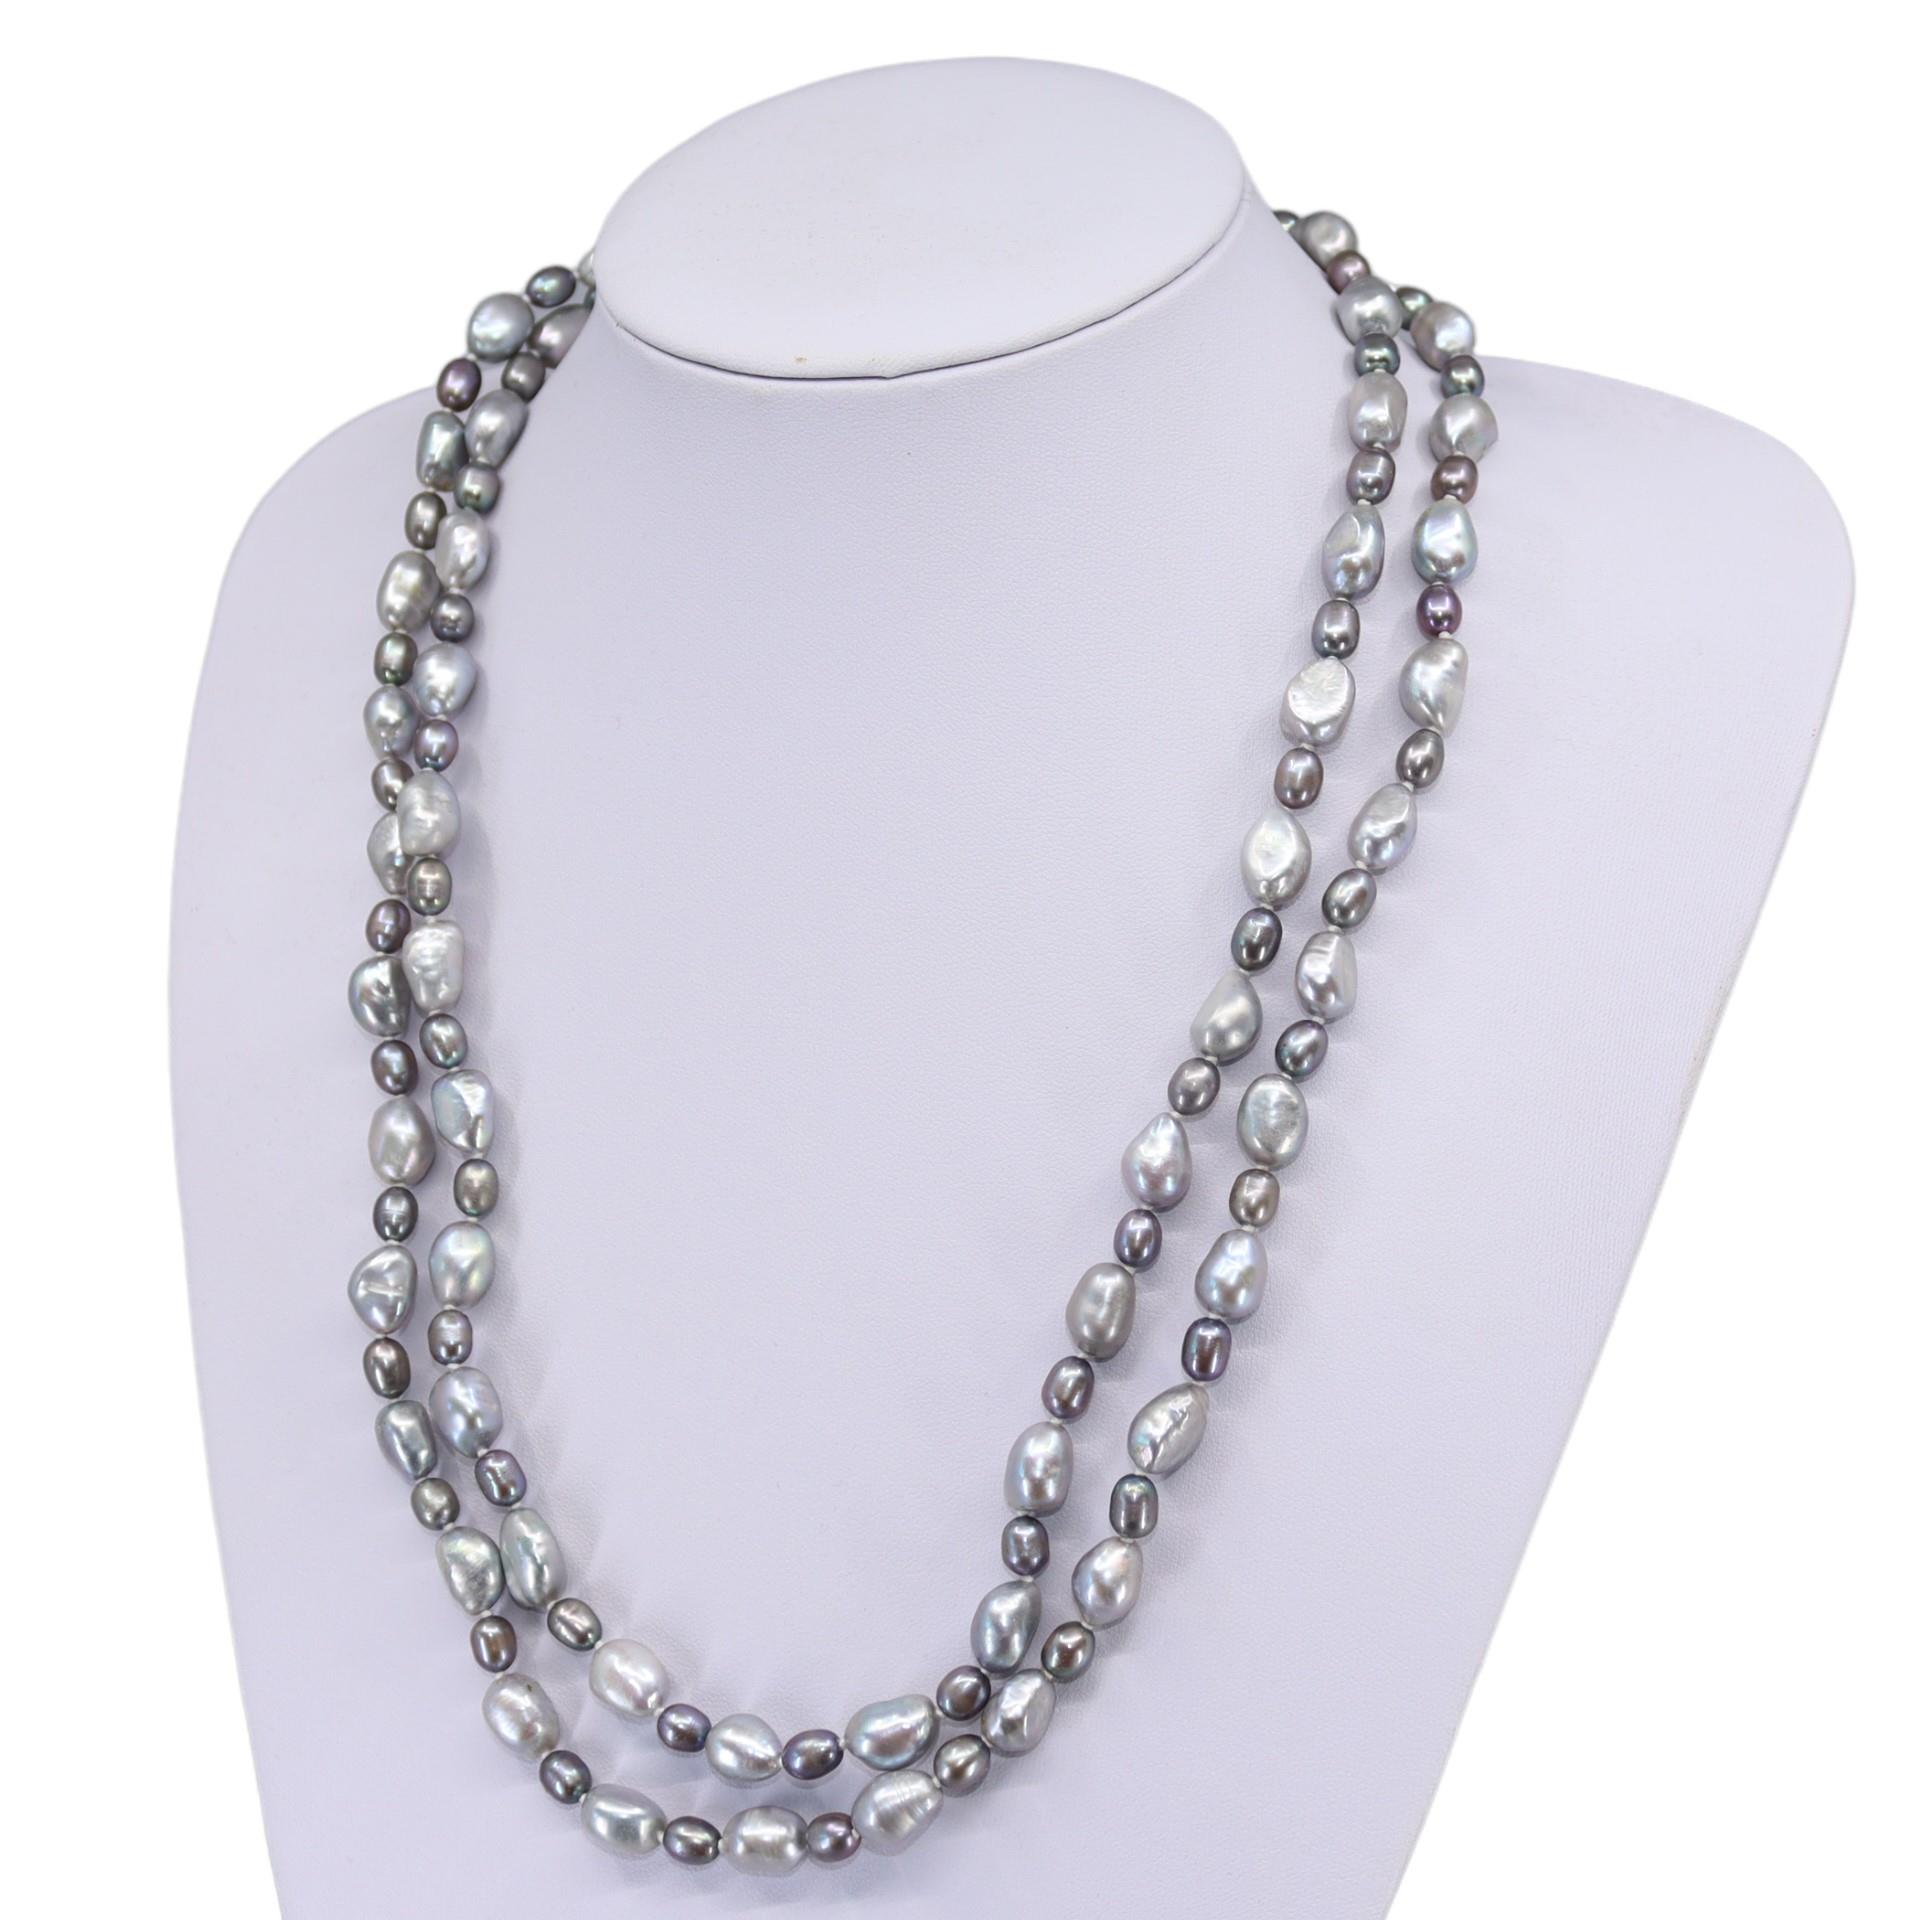 A BAROQUE SILVER-BLUE PEARL NECKLACE. (length 60.5cm) - Image 2 of 2